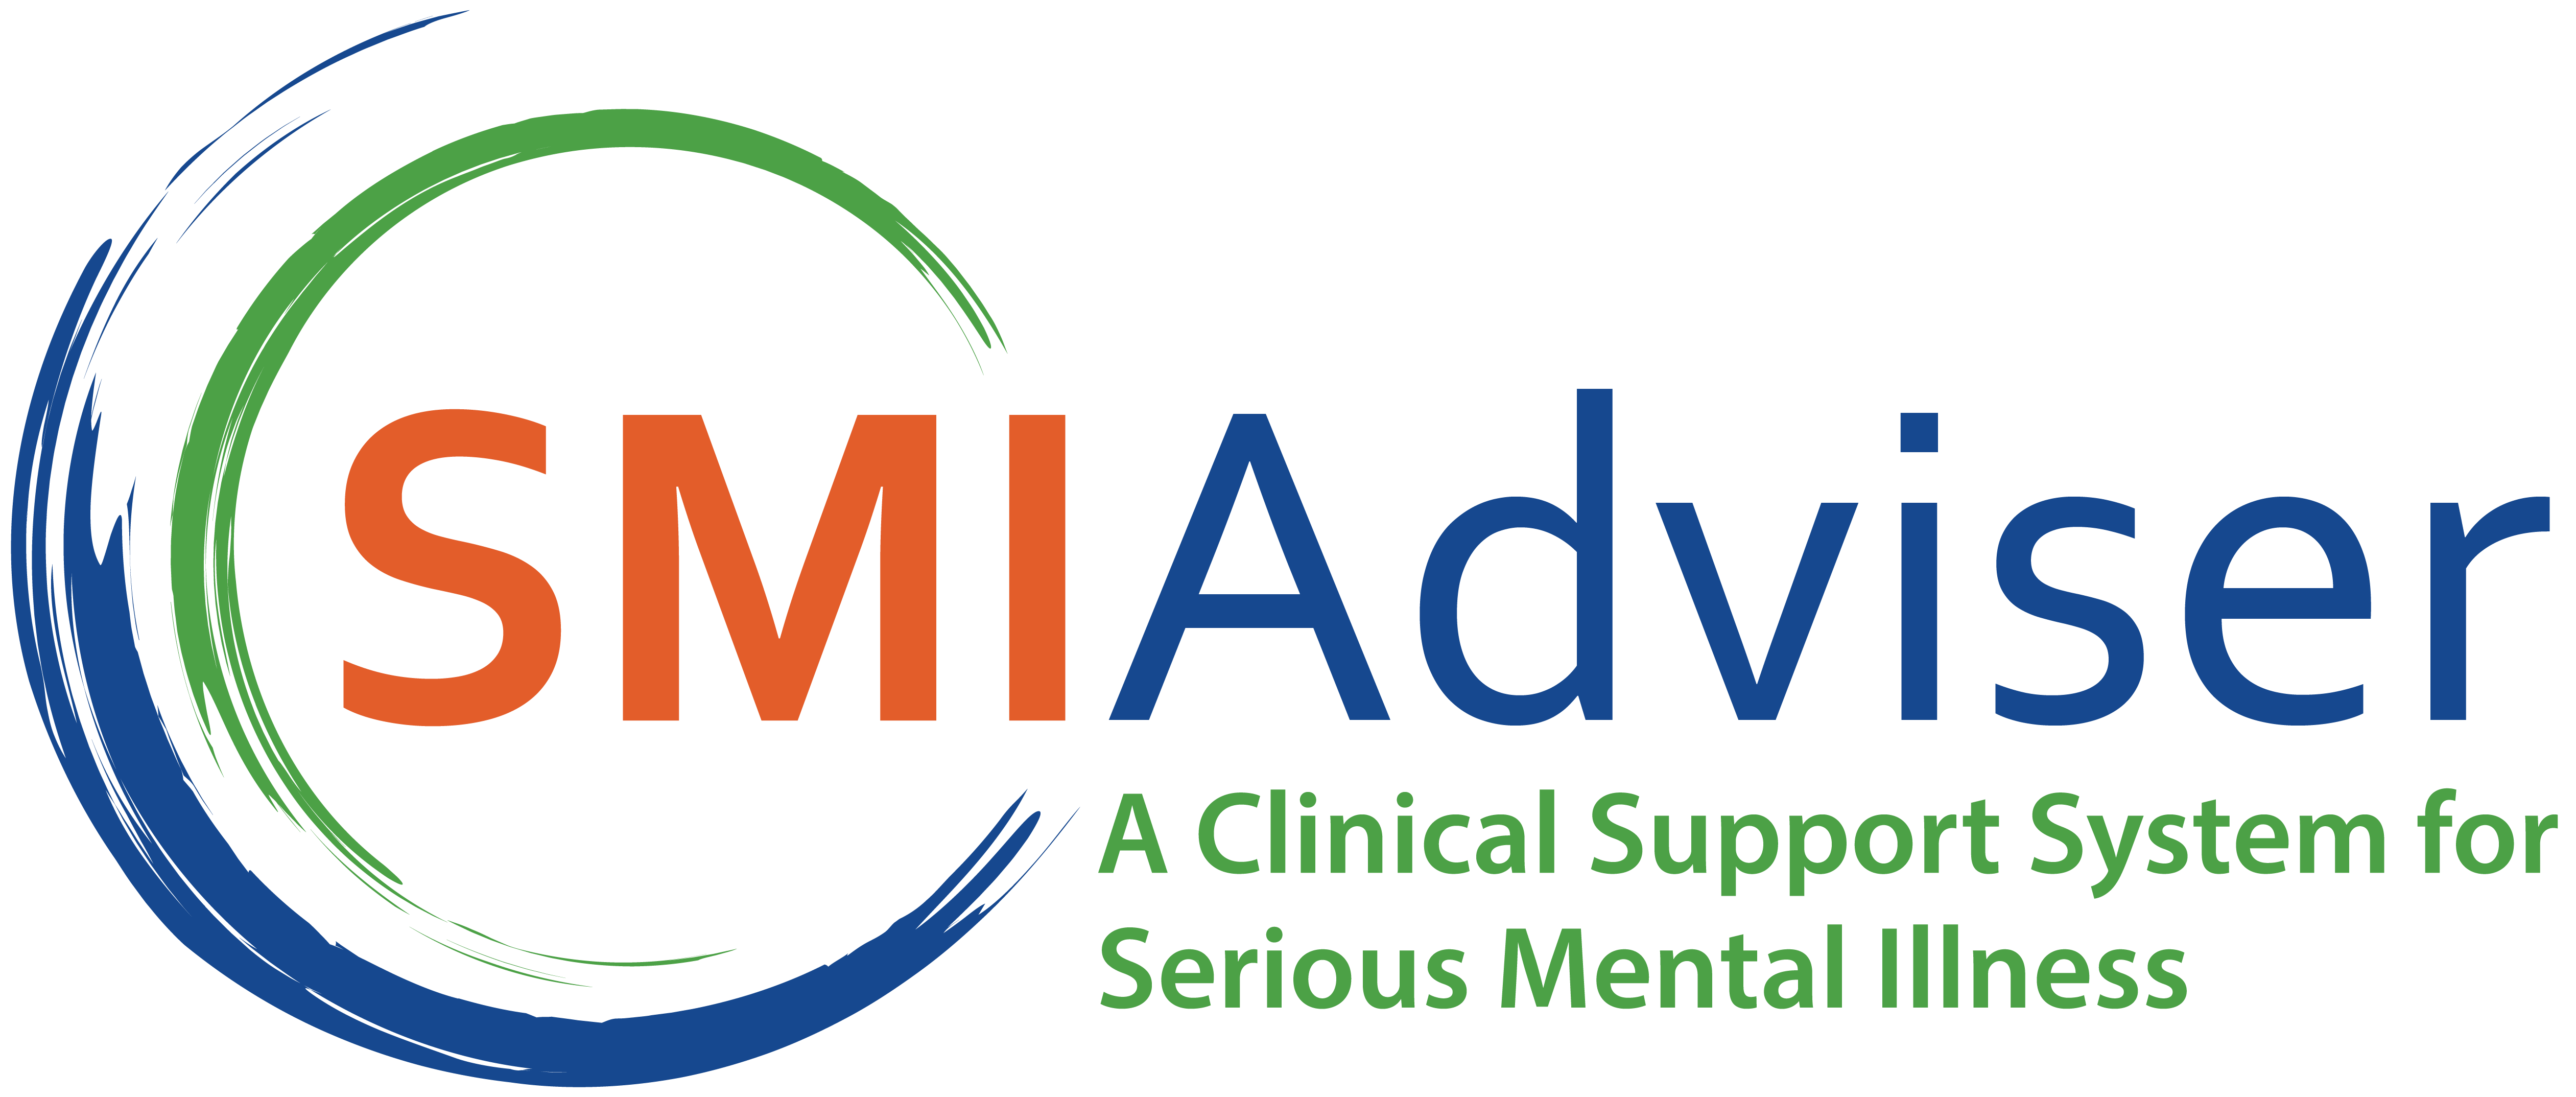 SMI Adviser A Clinical Support System for Serious Mental Illness Logo